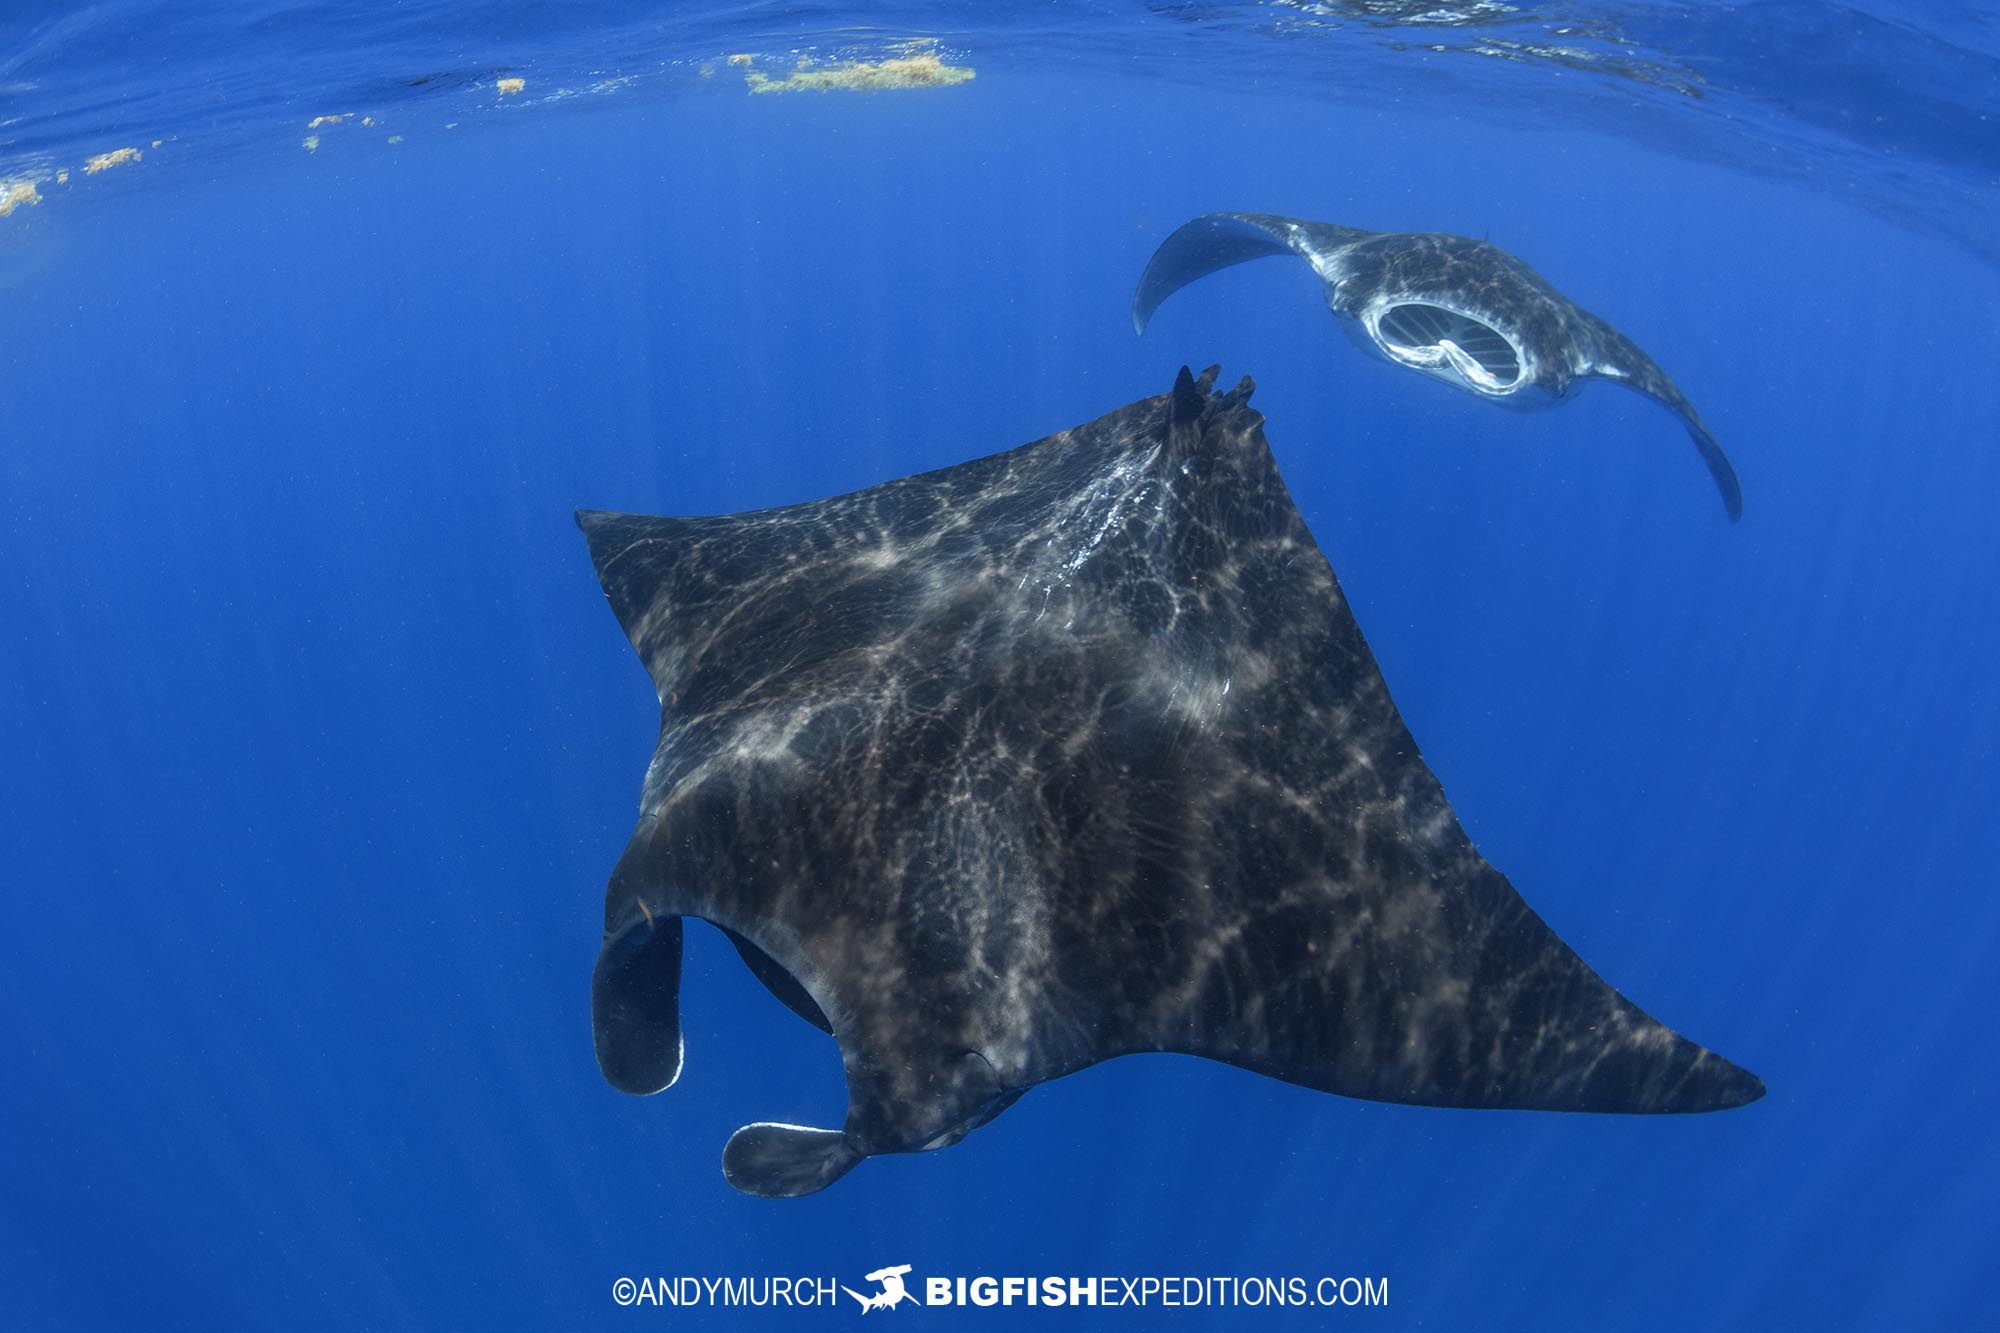 Snorkeling with Manta Rays near Cancun.